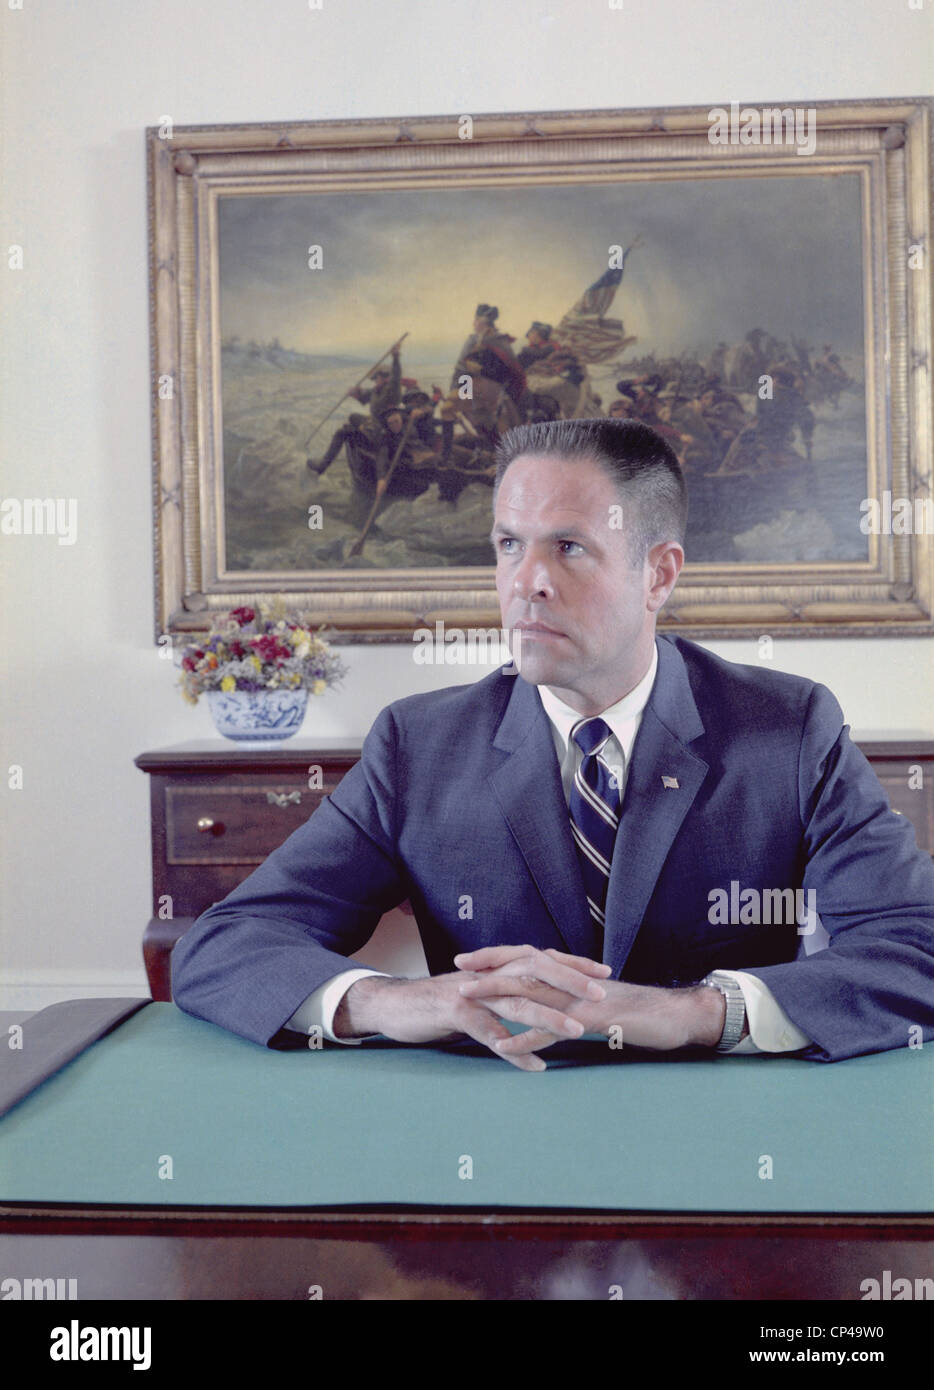 H. R. Haldeman served as White House Chief of Staff to President Nixon and for his role in the cover-up of the Watergate Stock Photo